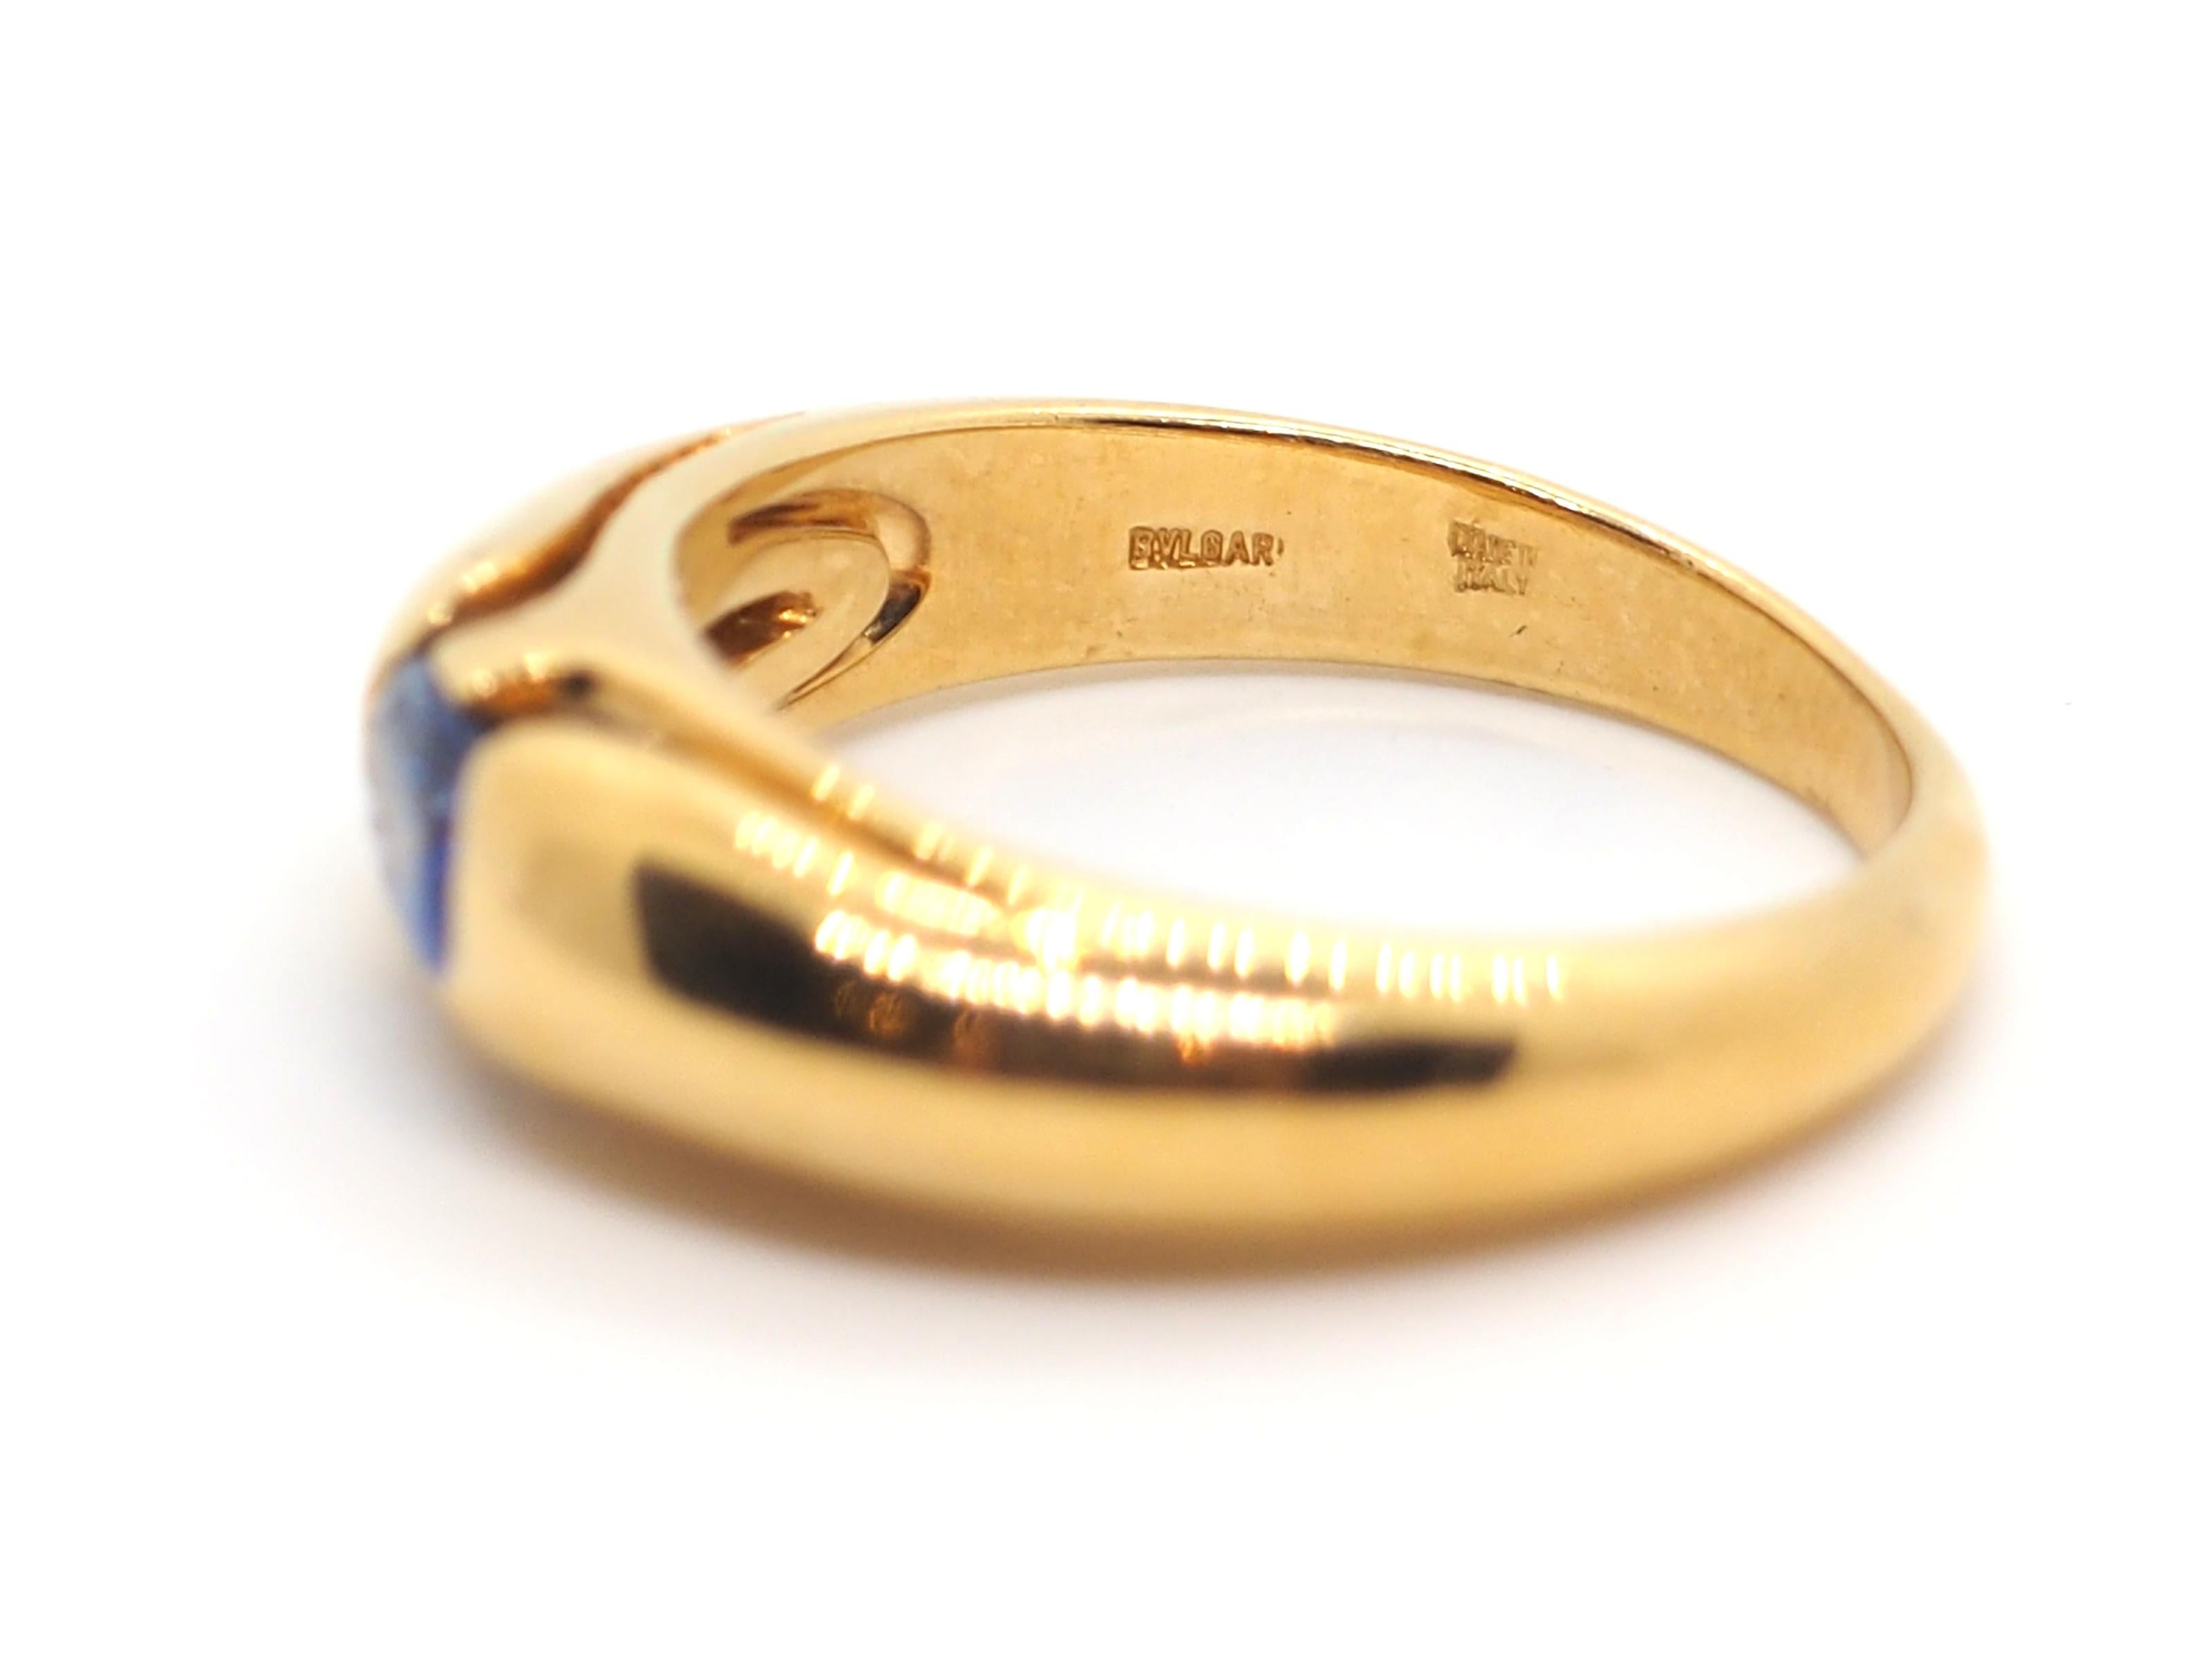 Classic stone ring crafted in 18 karat yellow gold, signed by Bvlgari 
The ring has a oval shape sapphire of 5.35mm length  4.32mm wide. 
Eu size: 51 and total of 5.9g

